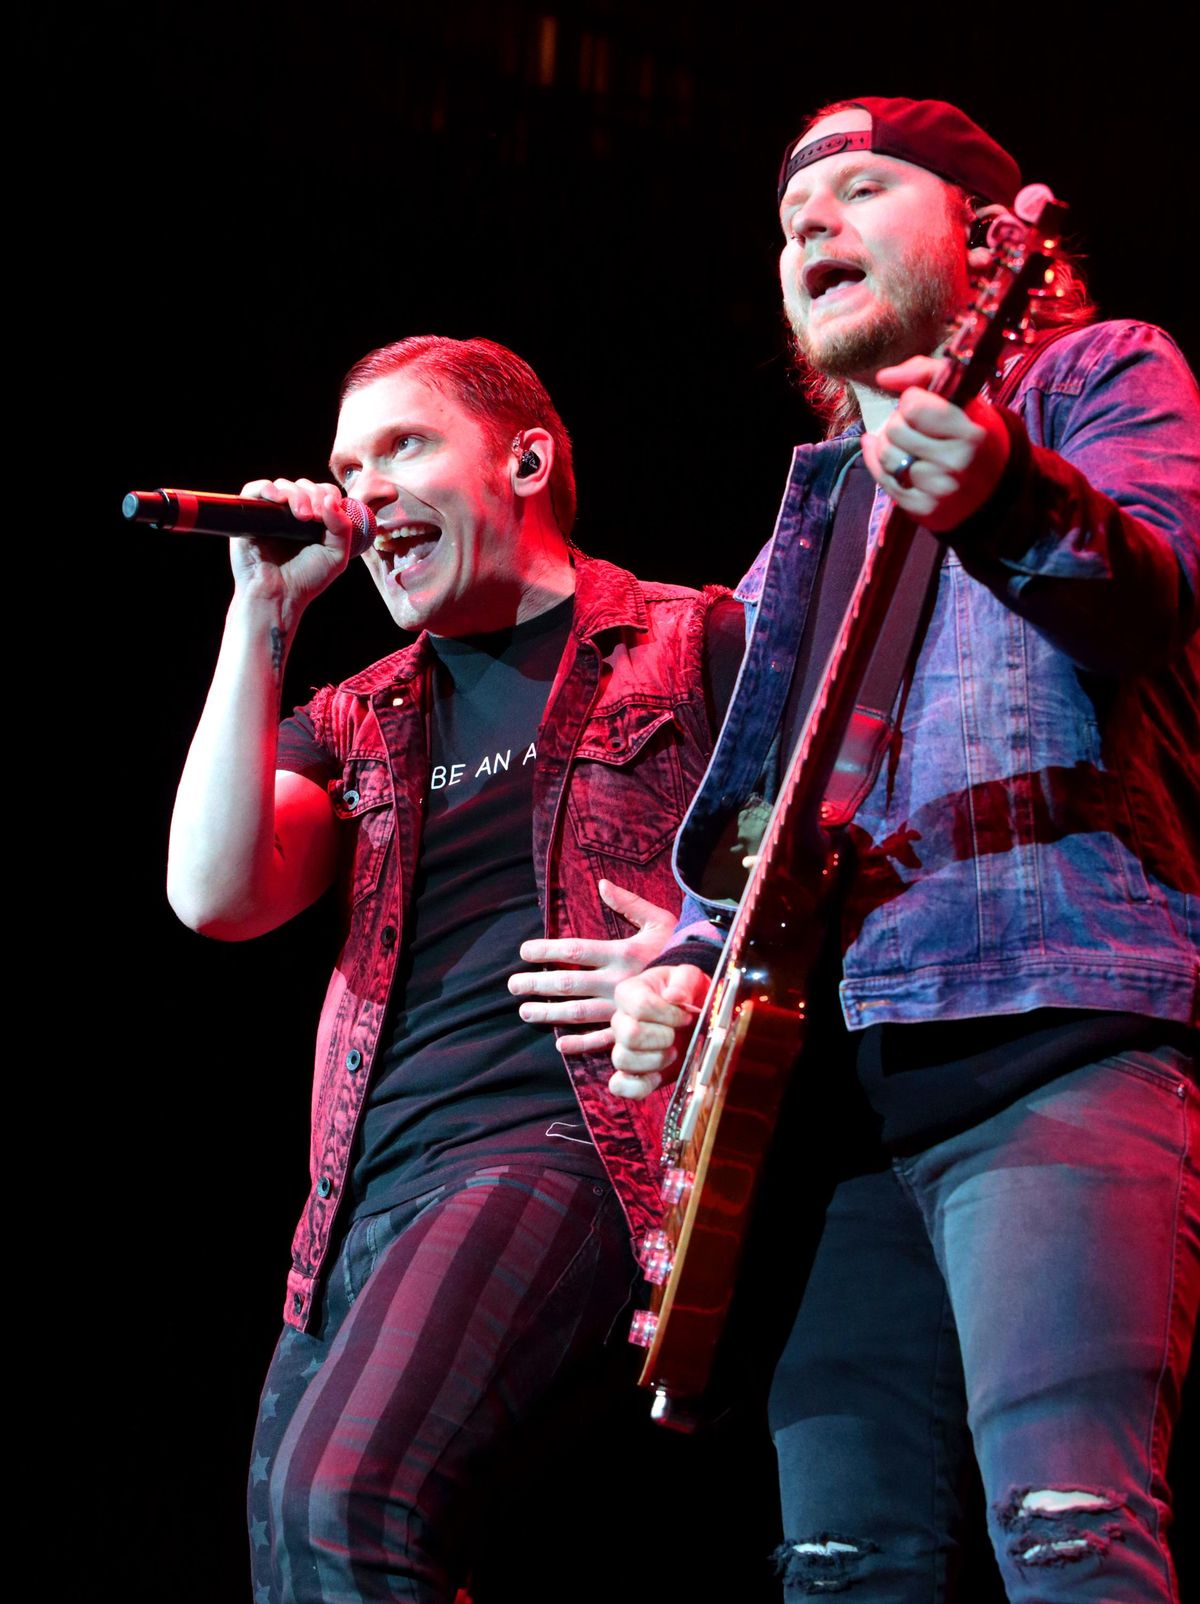 Brent Smith, left, and Zach Myers of Shinedown perform in Camden, N.J., last month. Godsmack and Shinedown are teaming up for a co-headlining tour that comes to Spokane in October. (Owen Sweeney / Invision/AP)